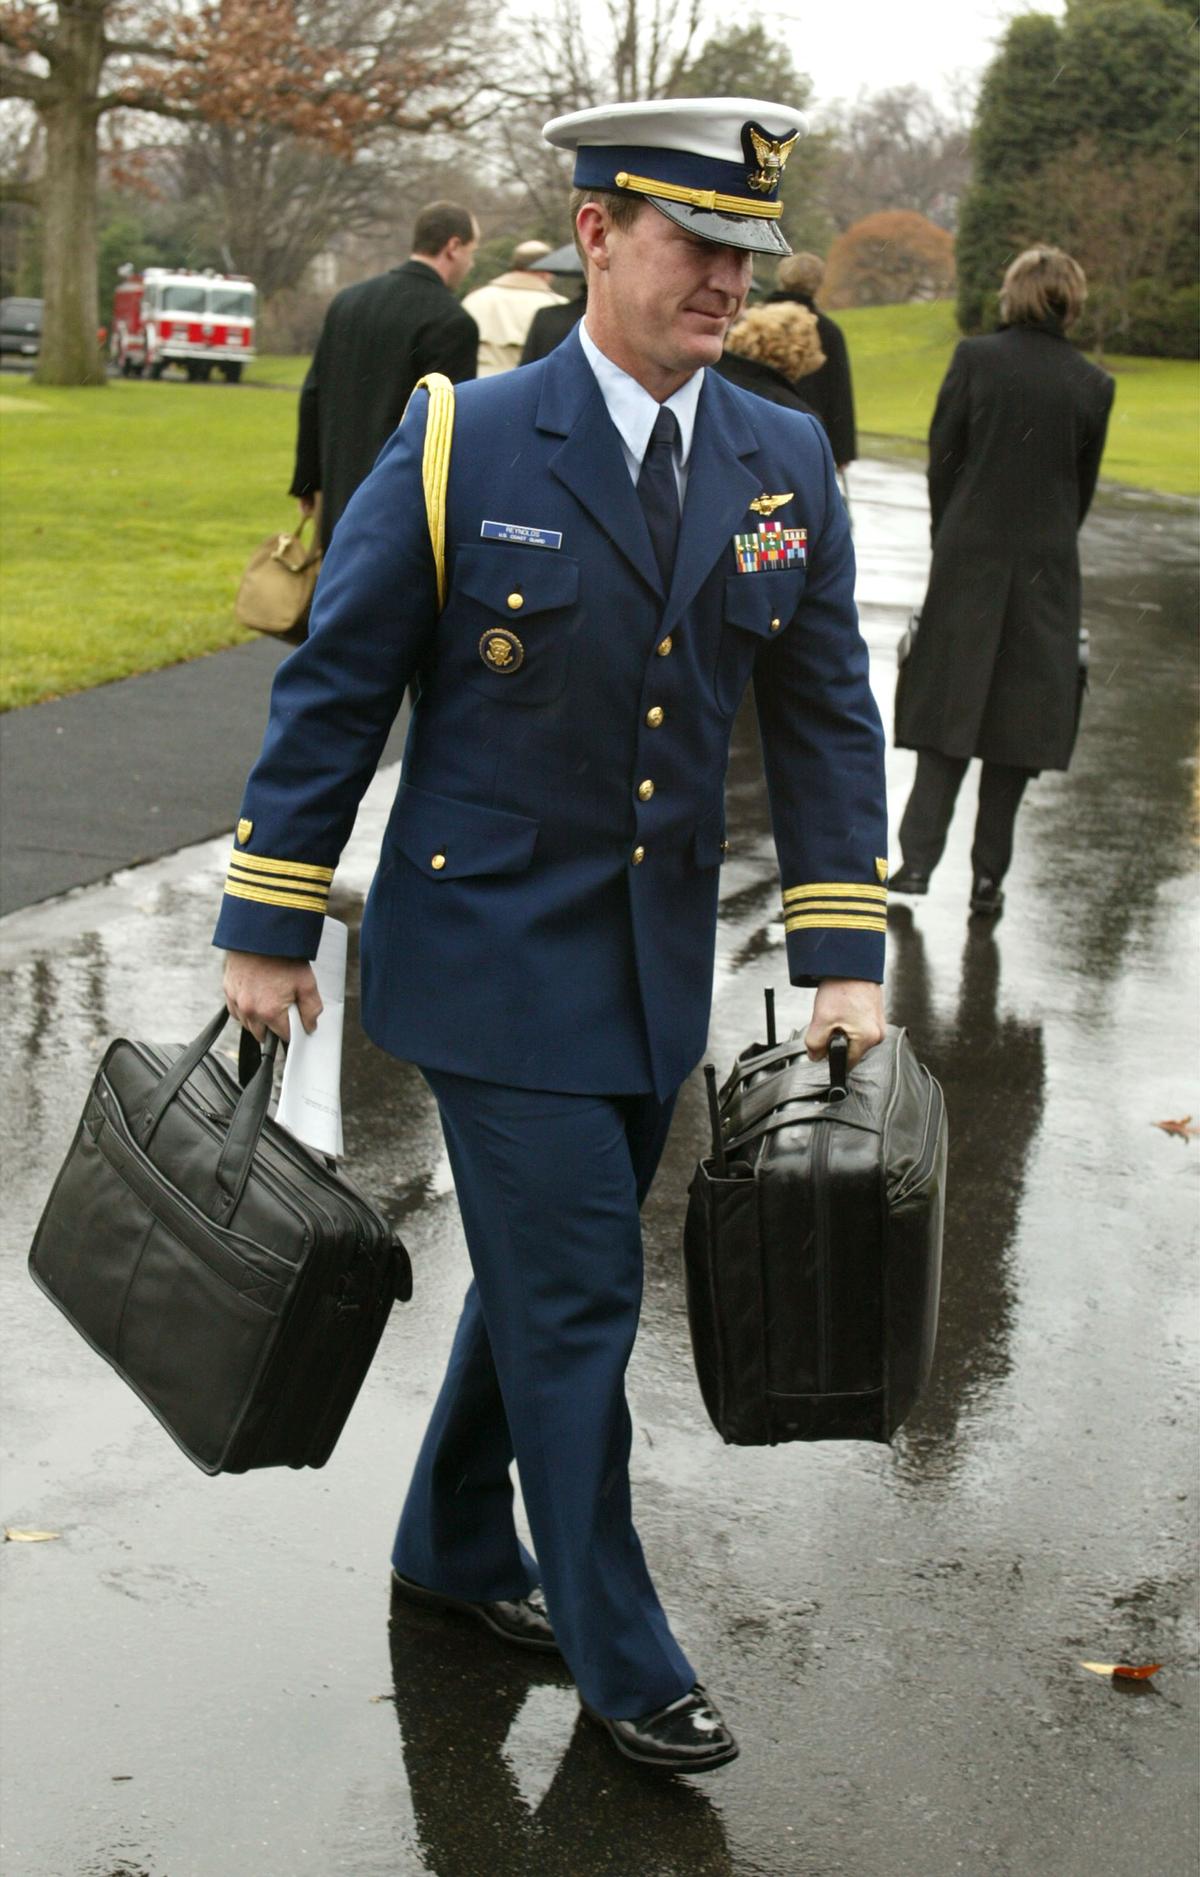 A U.S. military officer carries the "nuclear football," after returning with U.S. President George W. Bush to the White House, on  Jan. 7, 2002. (Mark Wilson/Getty Images)